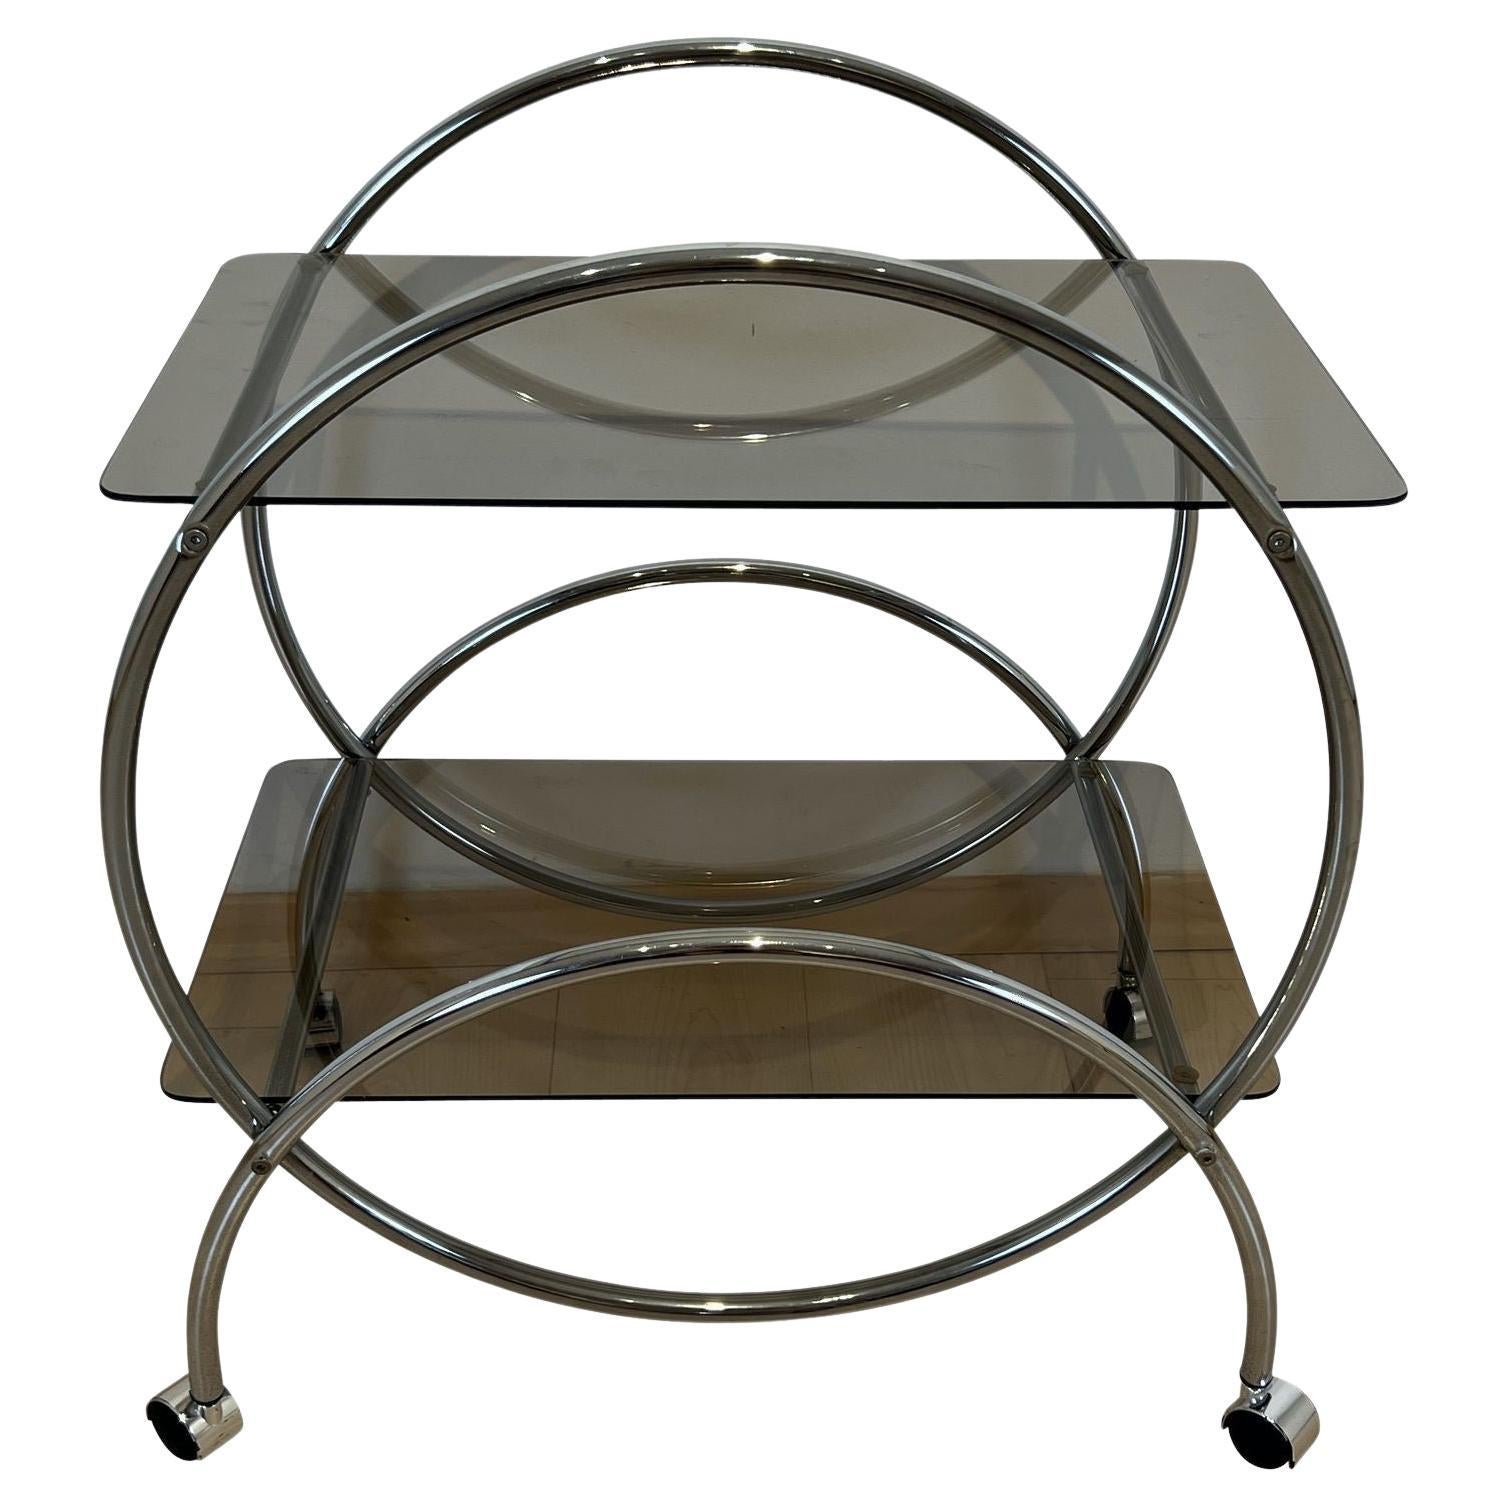 Art Deco Style Serving Trolley or Bar Cart, Chrome and Glass, Germany circa 1970